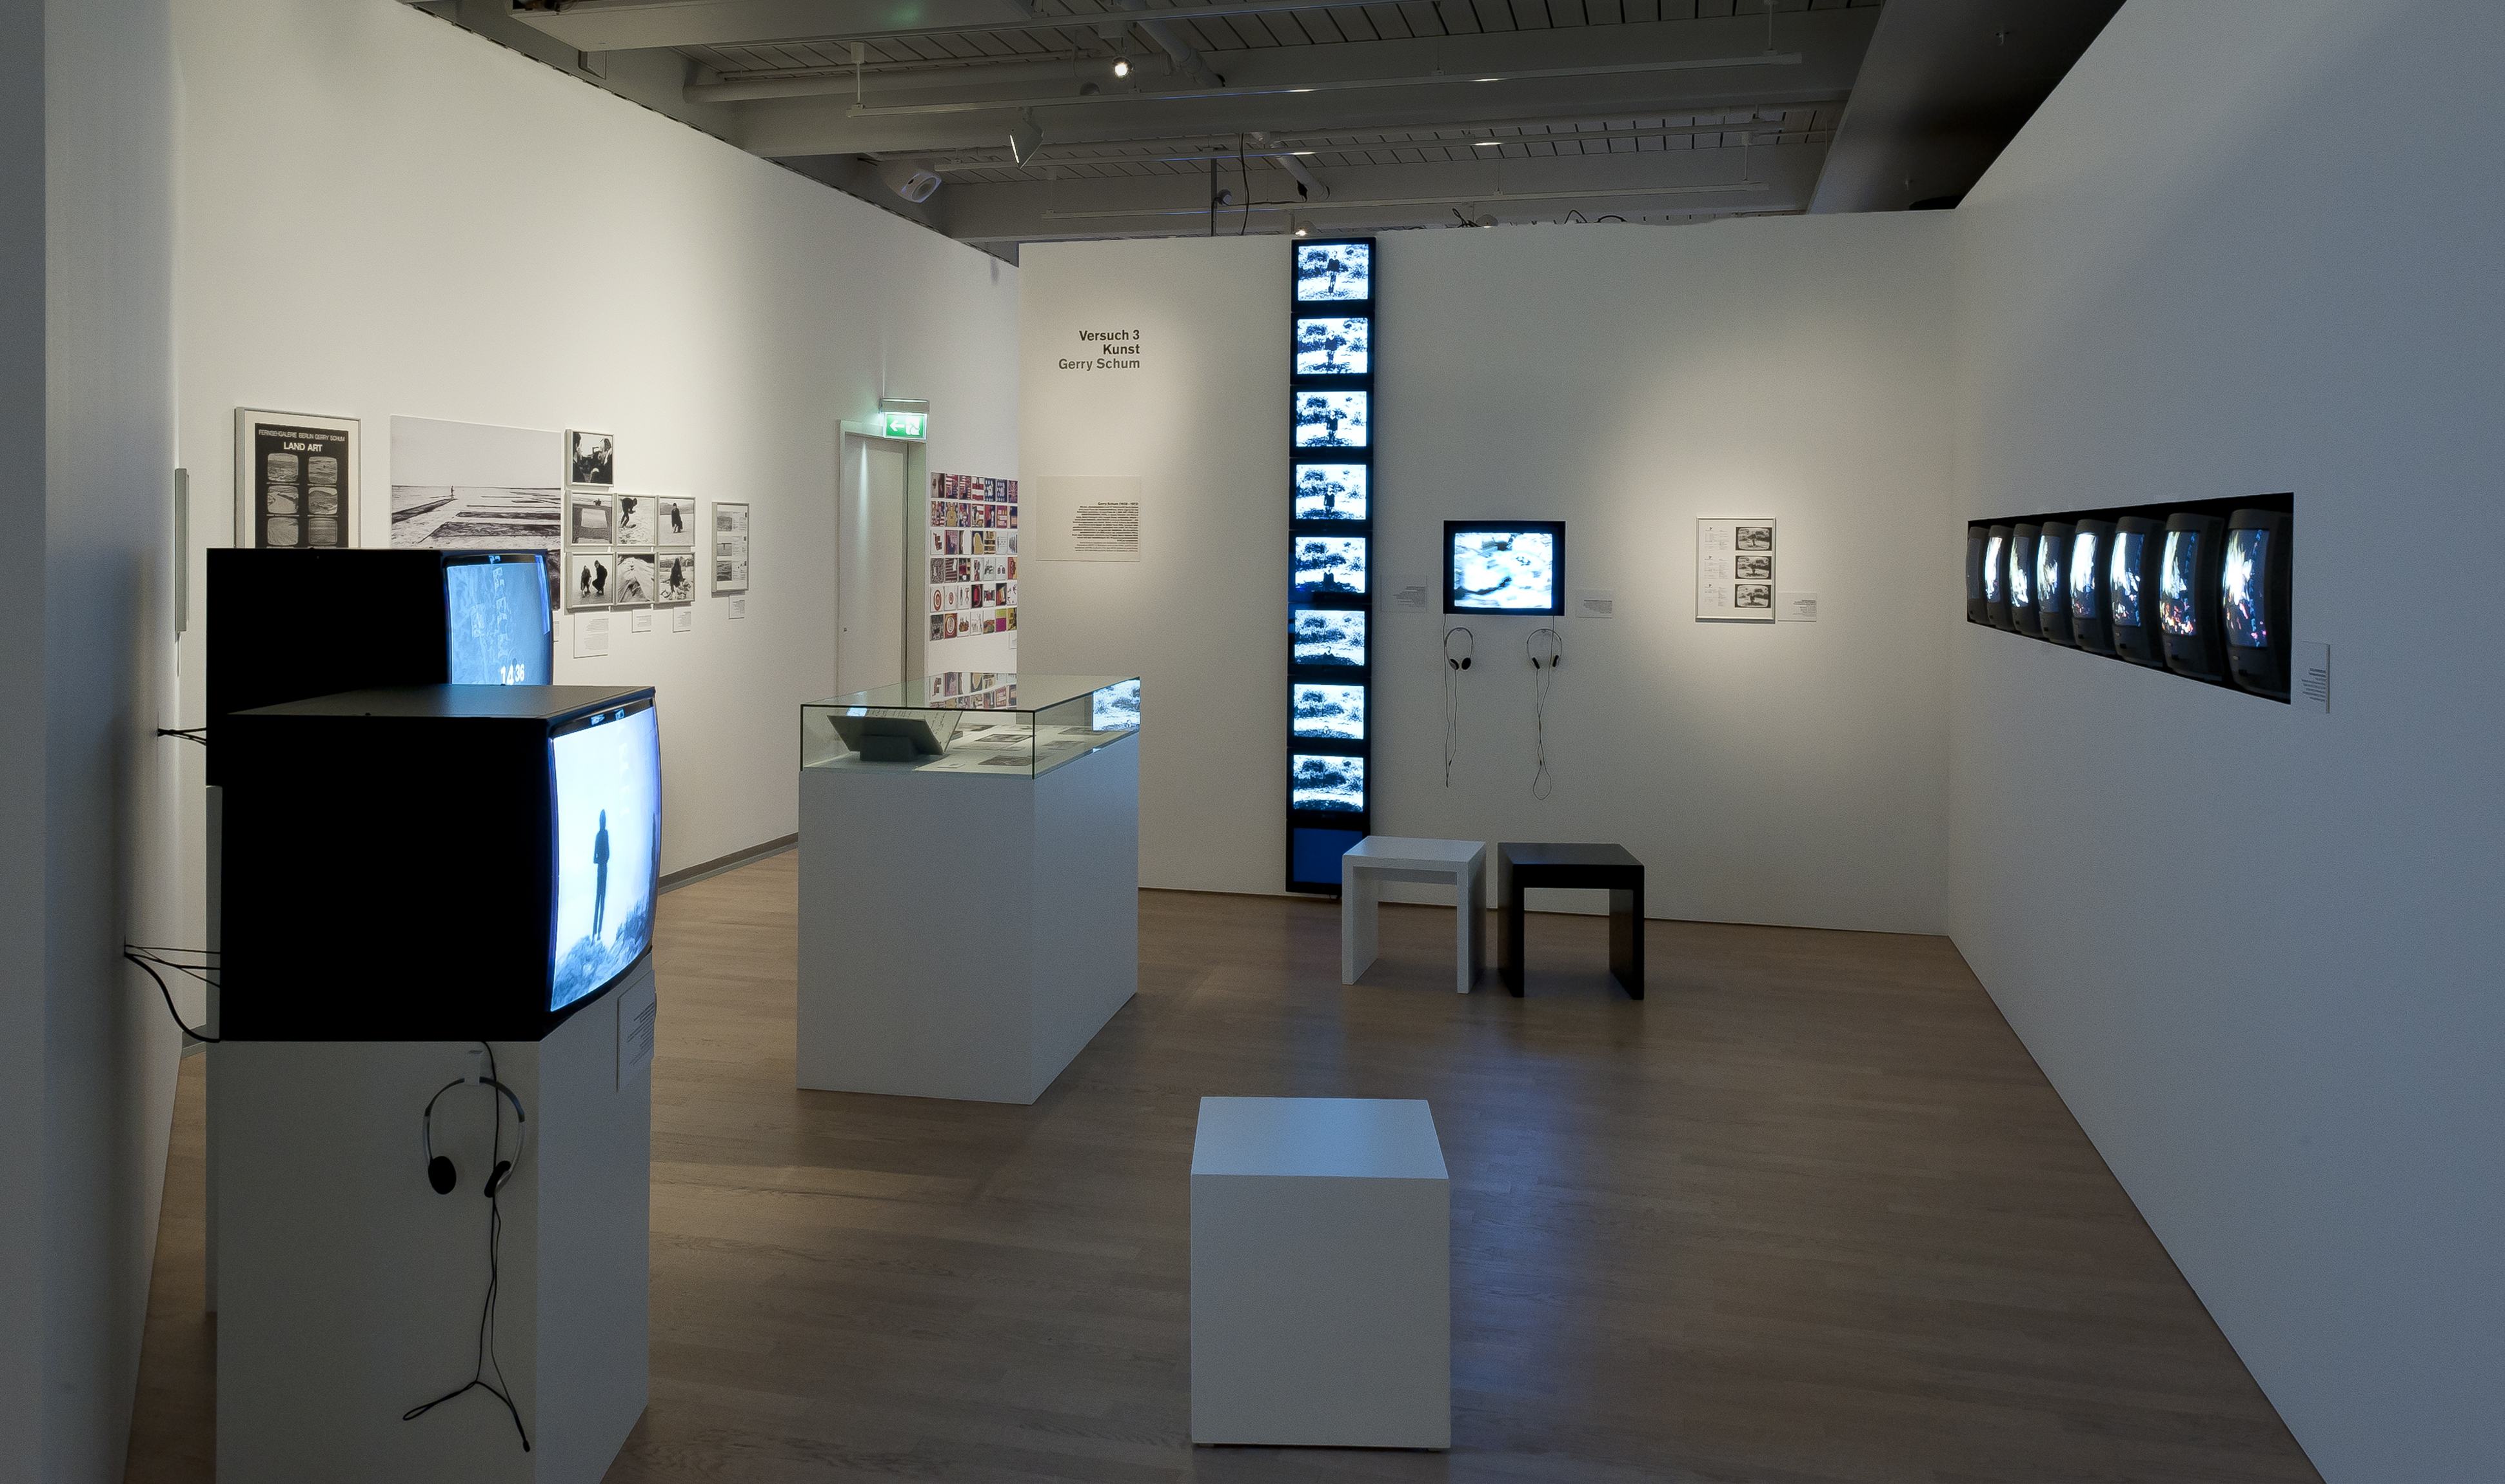 View of the exhibition „Experimental Television of the 1960s and ’70s", Deutsche Kinemathek, Berlin